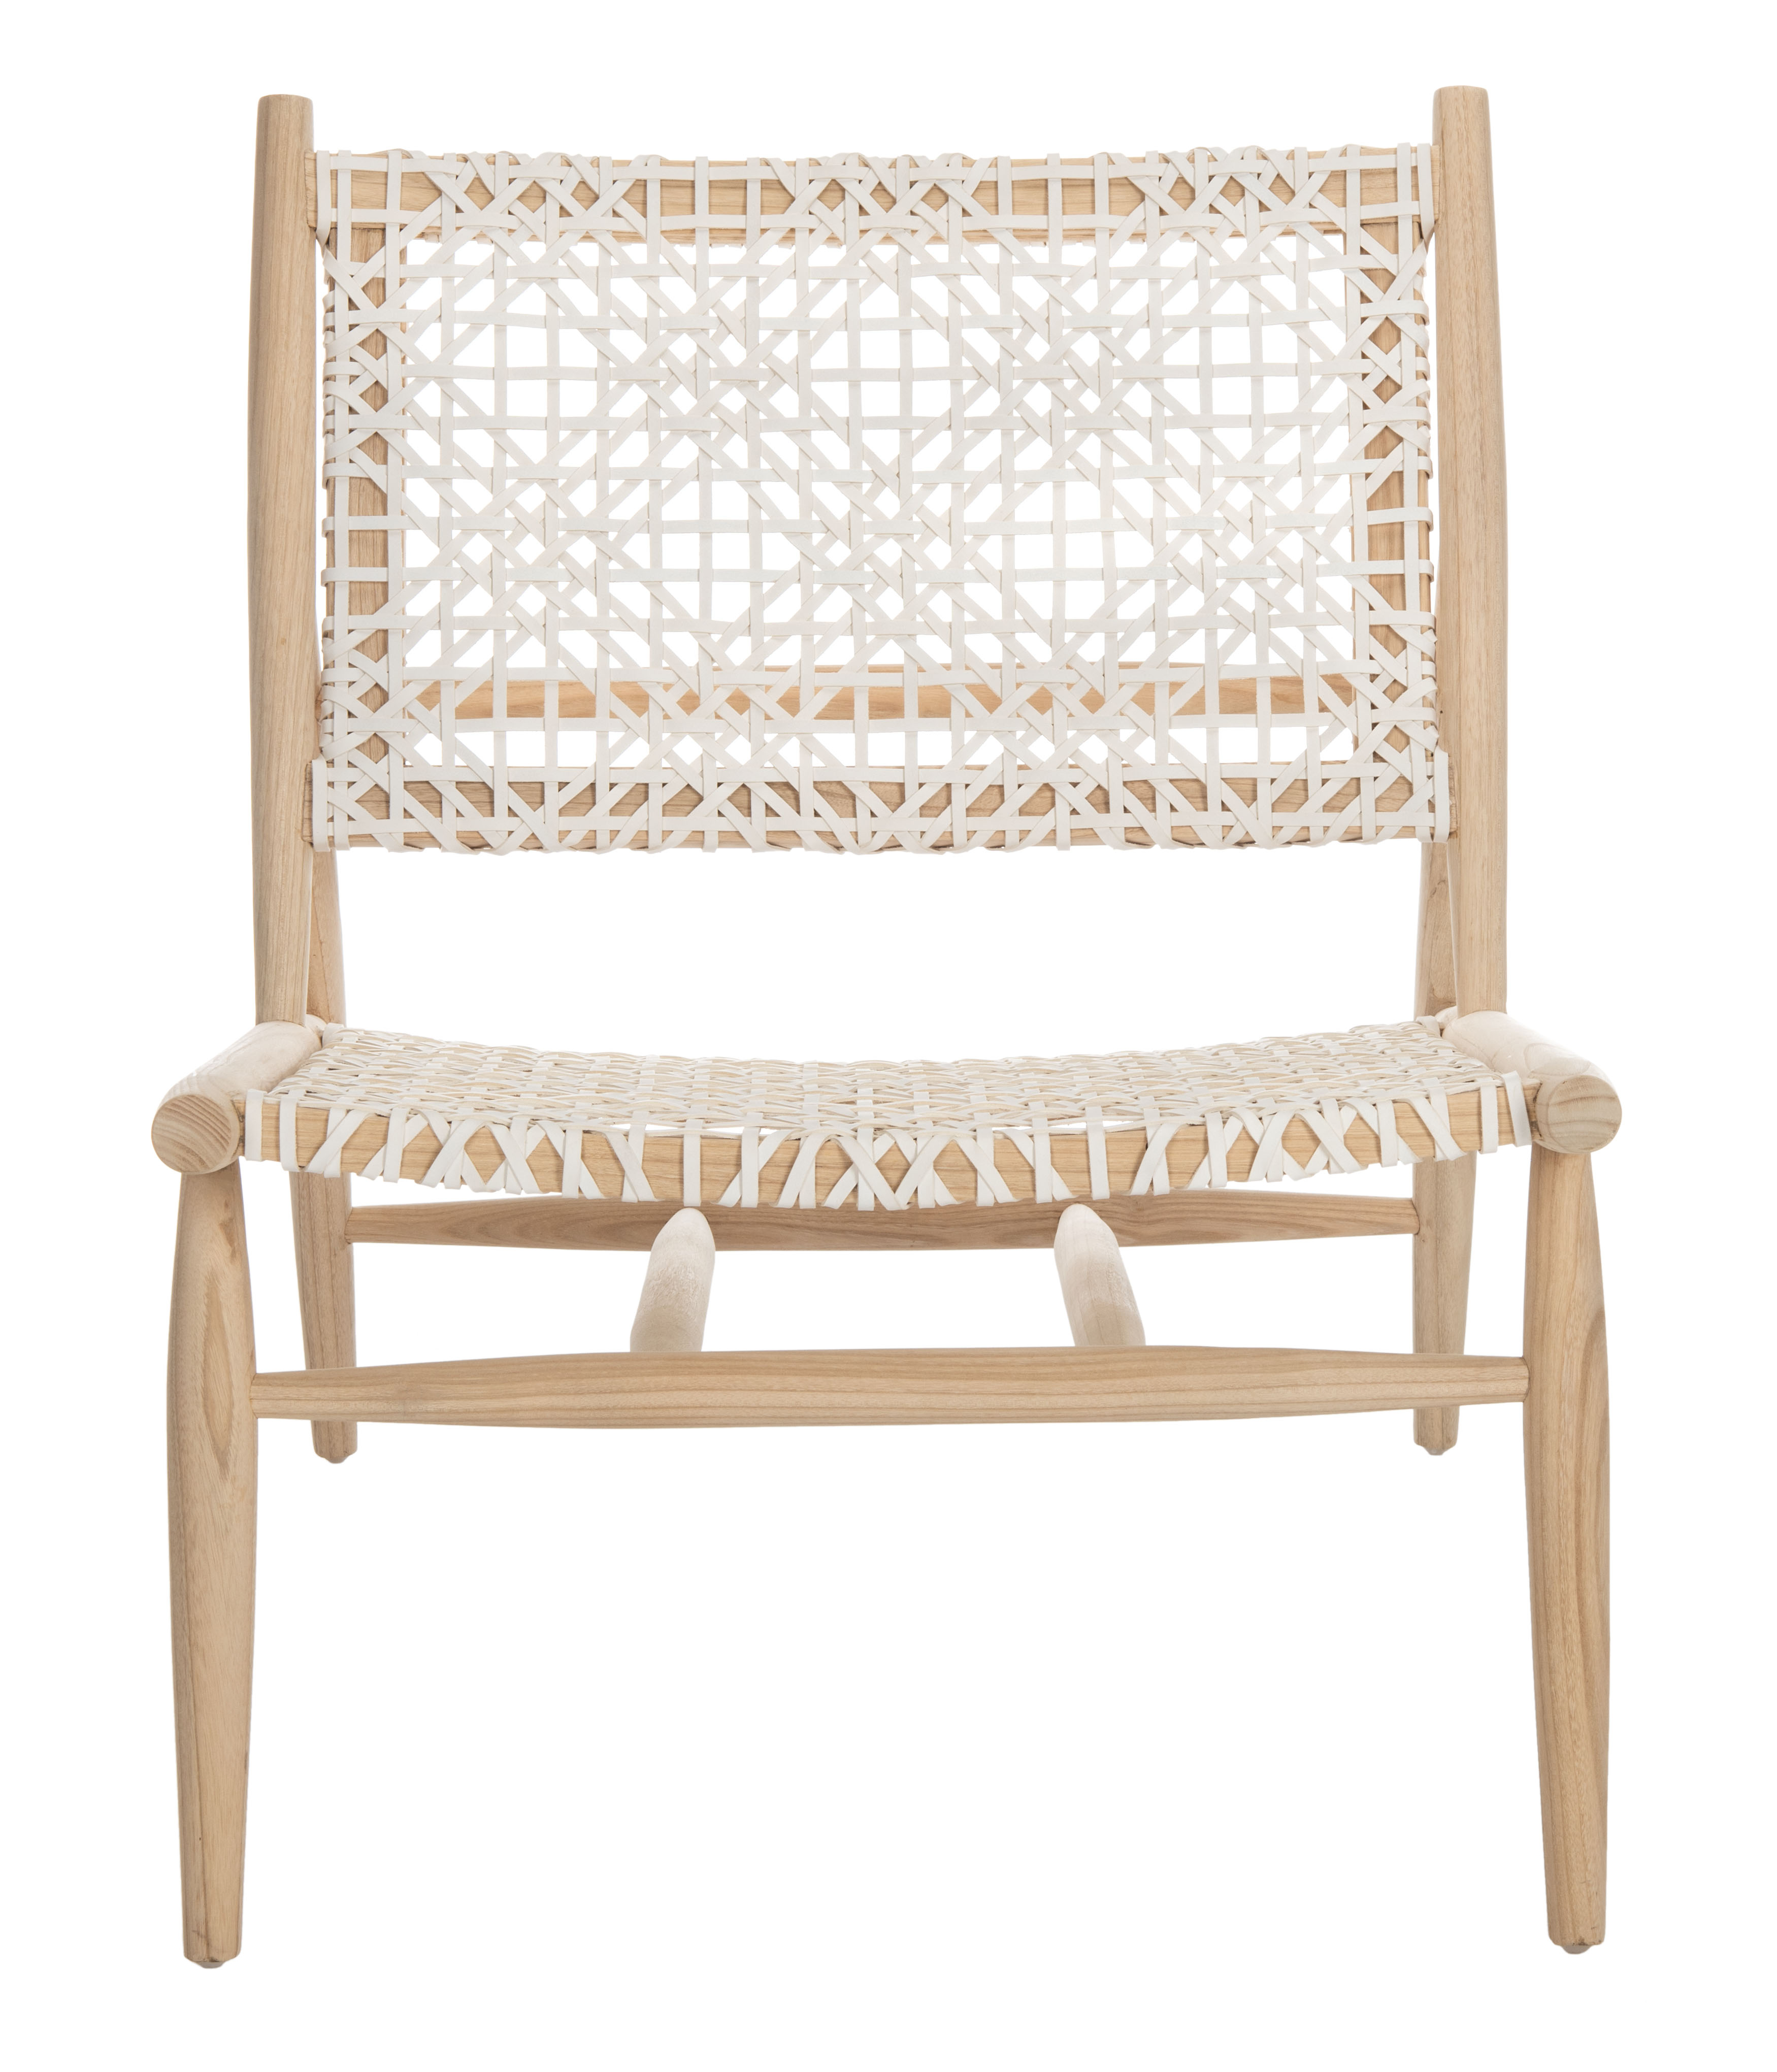 SAFAVIEH Bandelier Leather Weave Nautical Club Chair, Natural/White - image 8 of 11